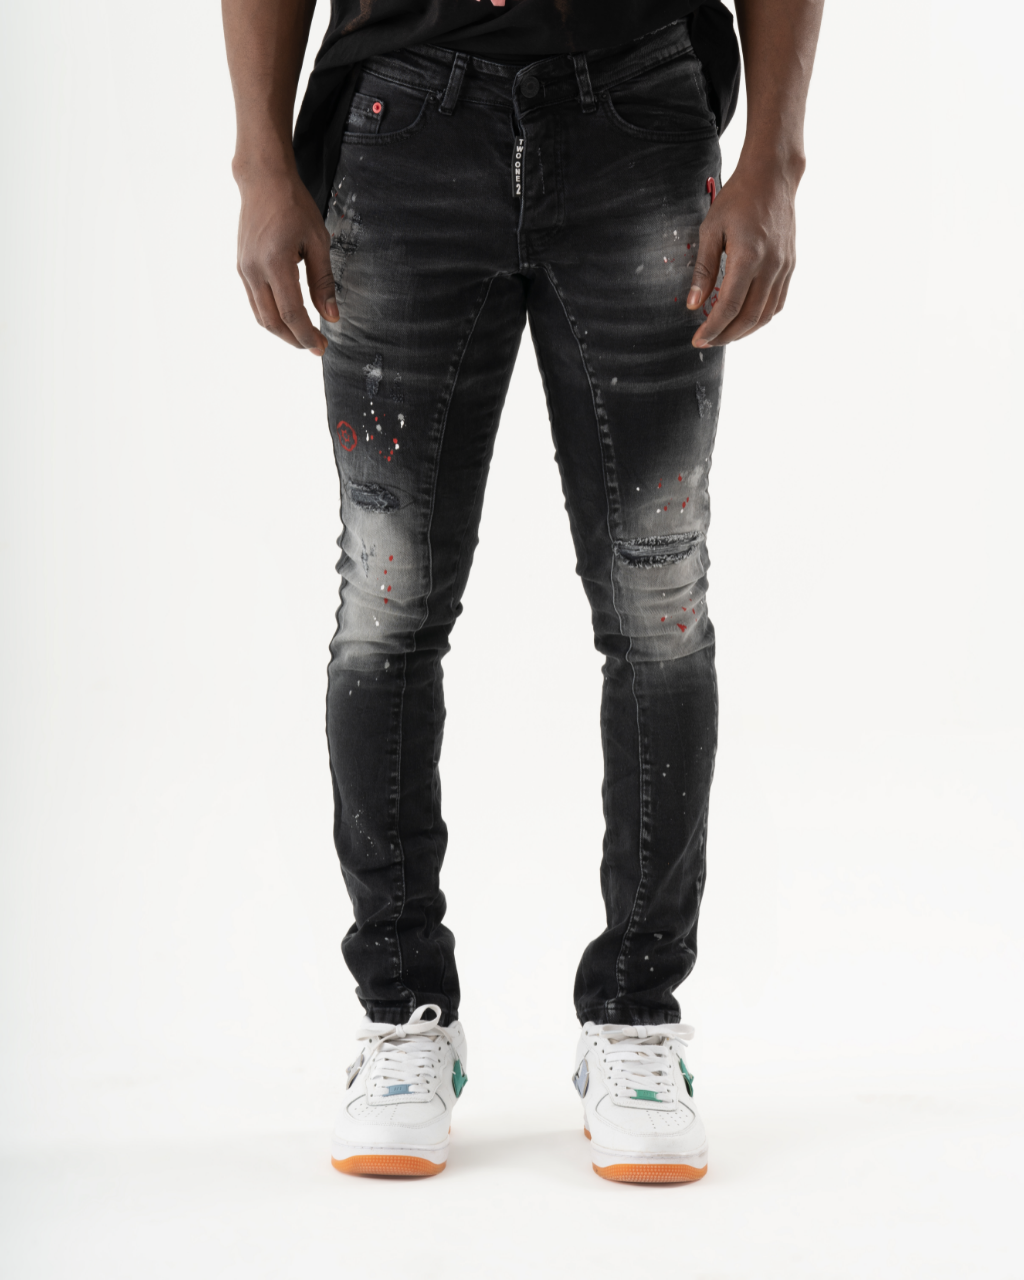 A man wearing ripped THUNDERBIRD jeans and a white t-shirt.